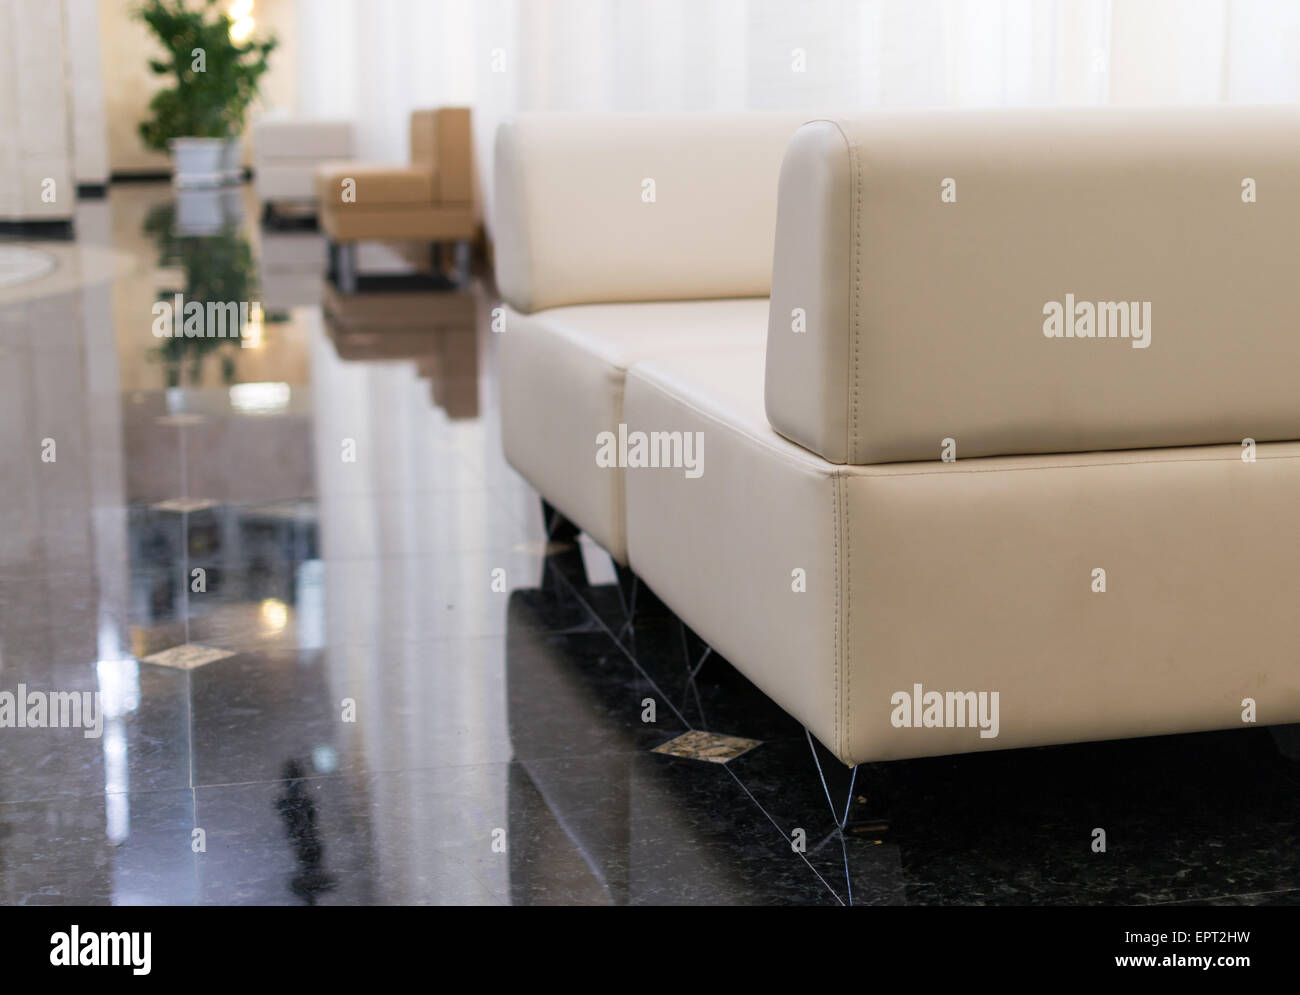 Modern sofas reflected on tiling with house plant Stock Photo